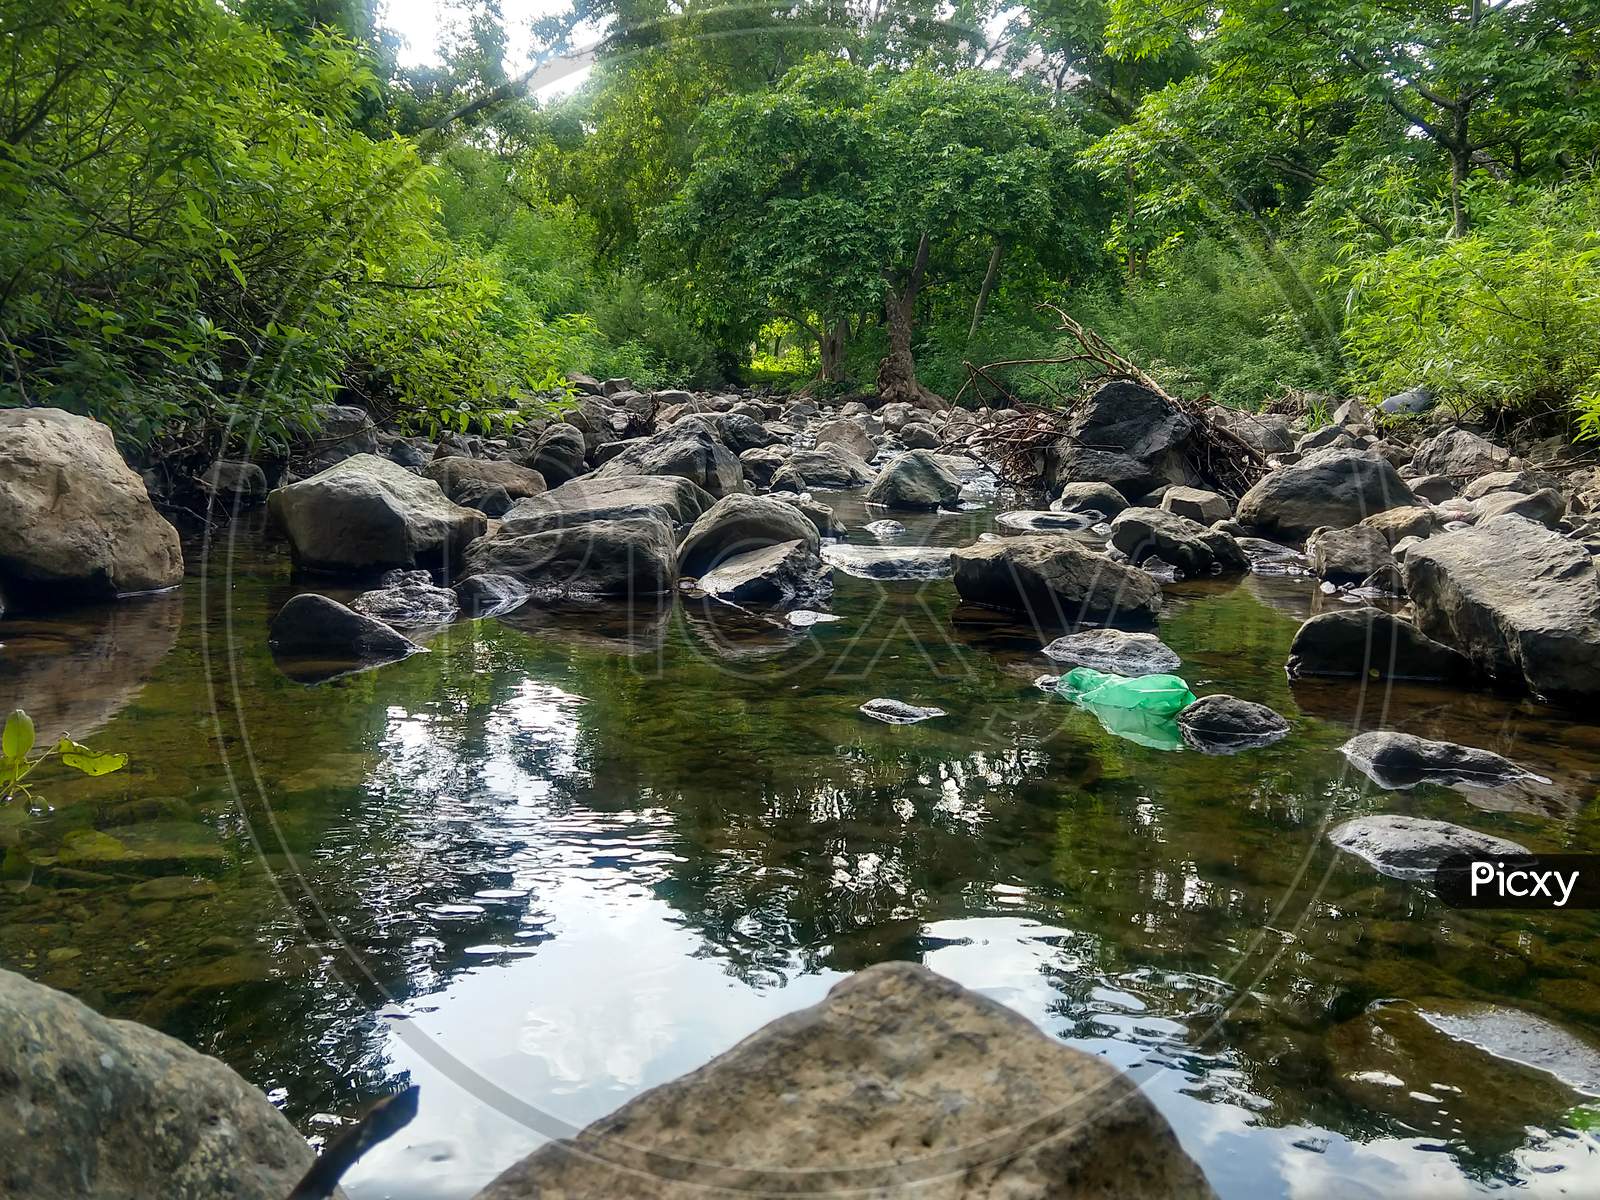 A Shallow Rocky River In The Middle Of A Forest. Branches Of Trees Over The River Looking Like Tunnel In Background.